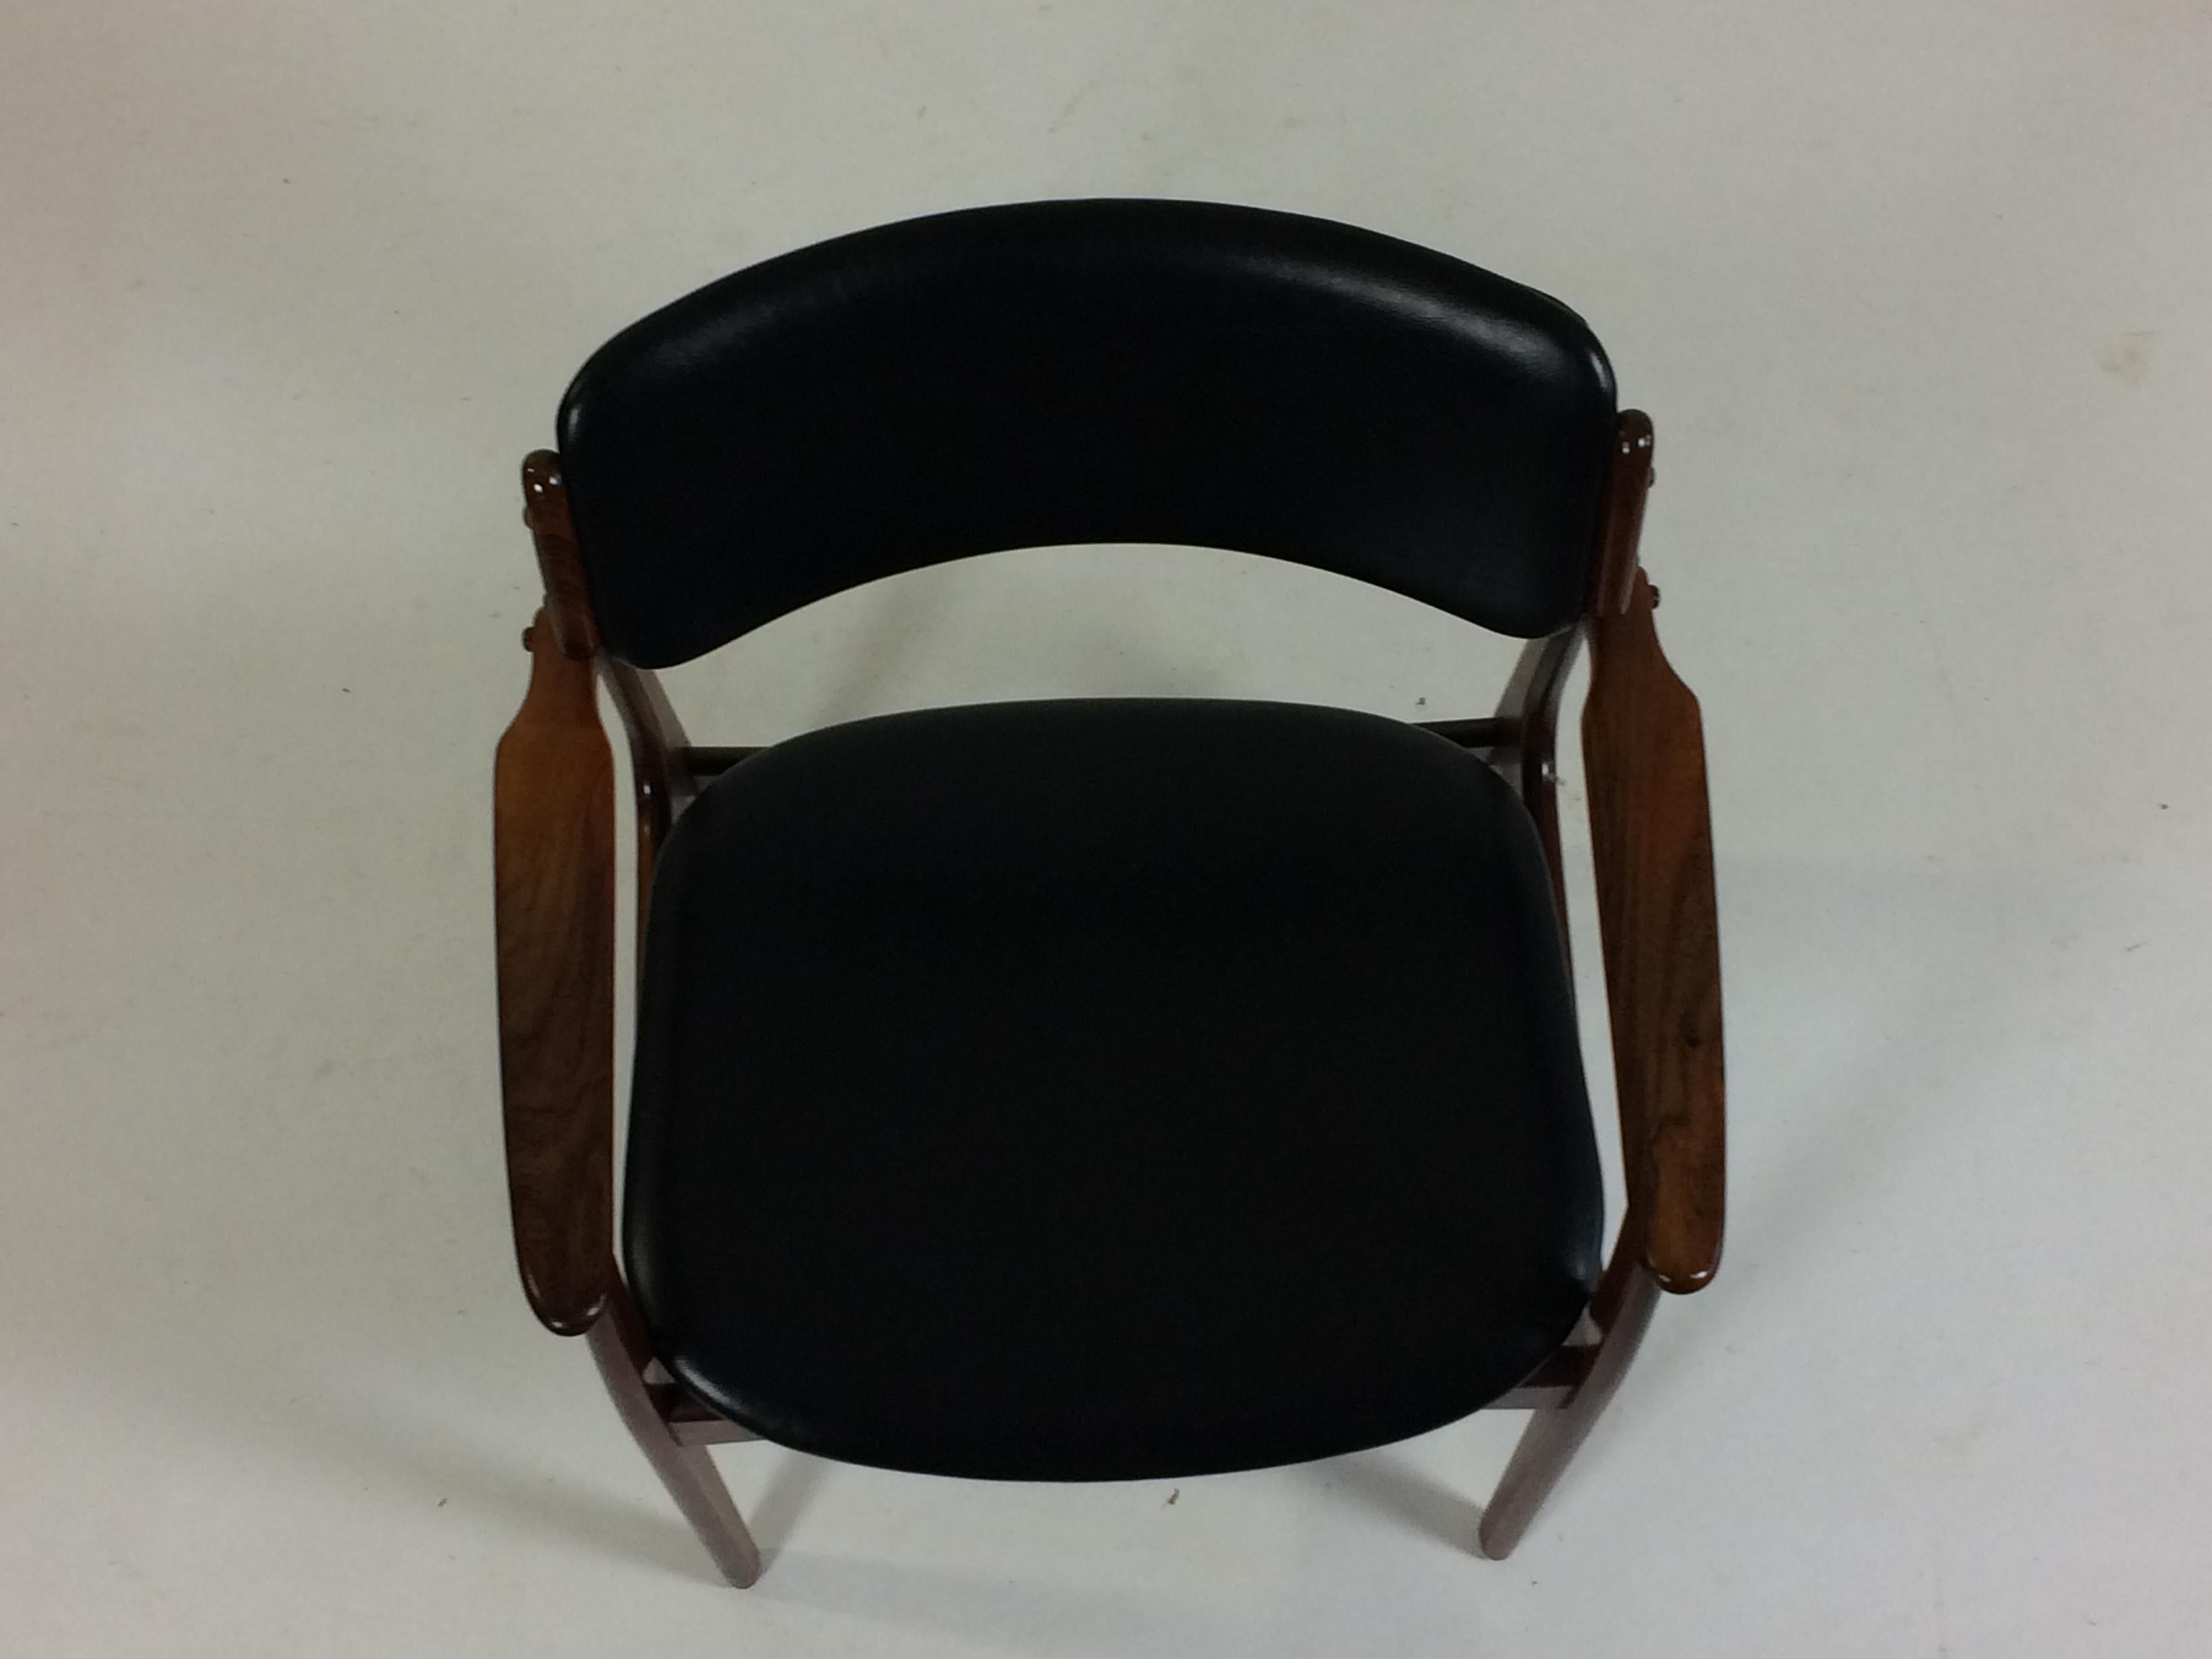 1960s Erik Buch Fully Restored Armchairs in Rosewood, Inc. Reupholstery In Good Condition For Sale In Knebel, DK